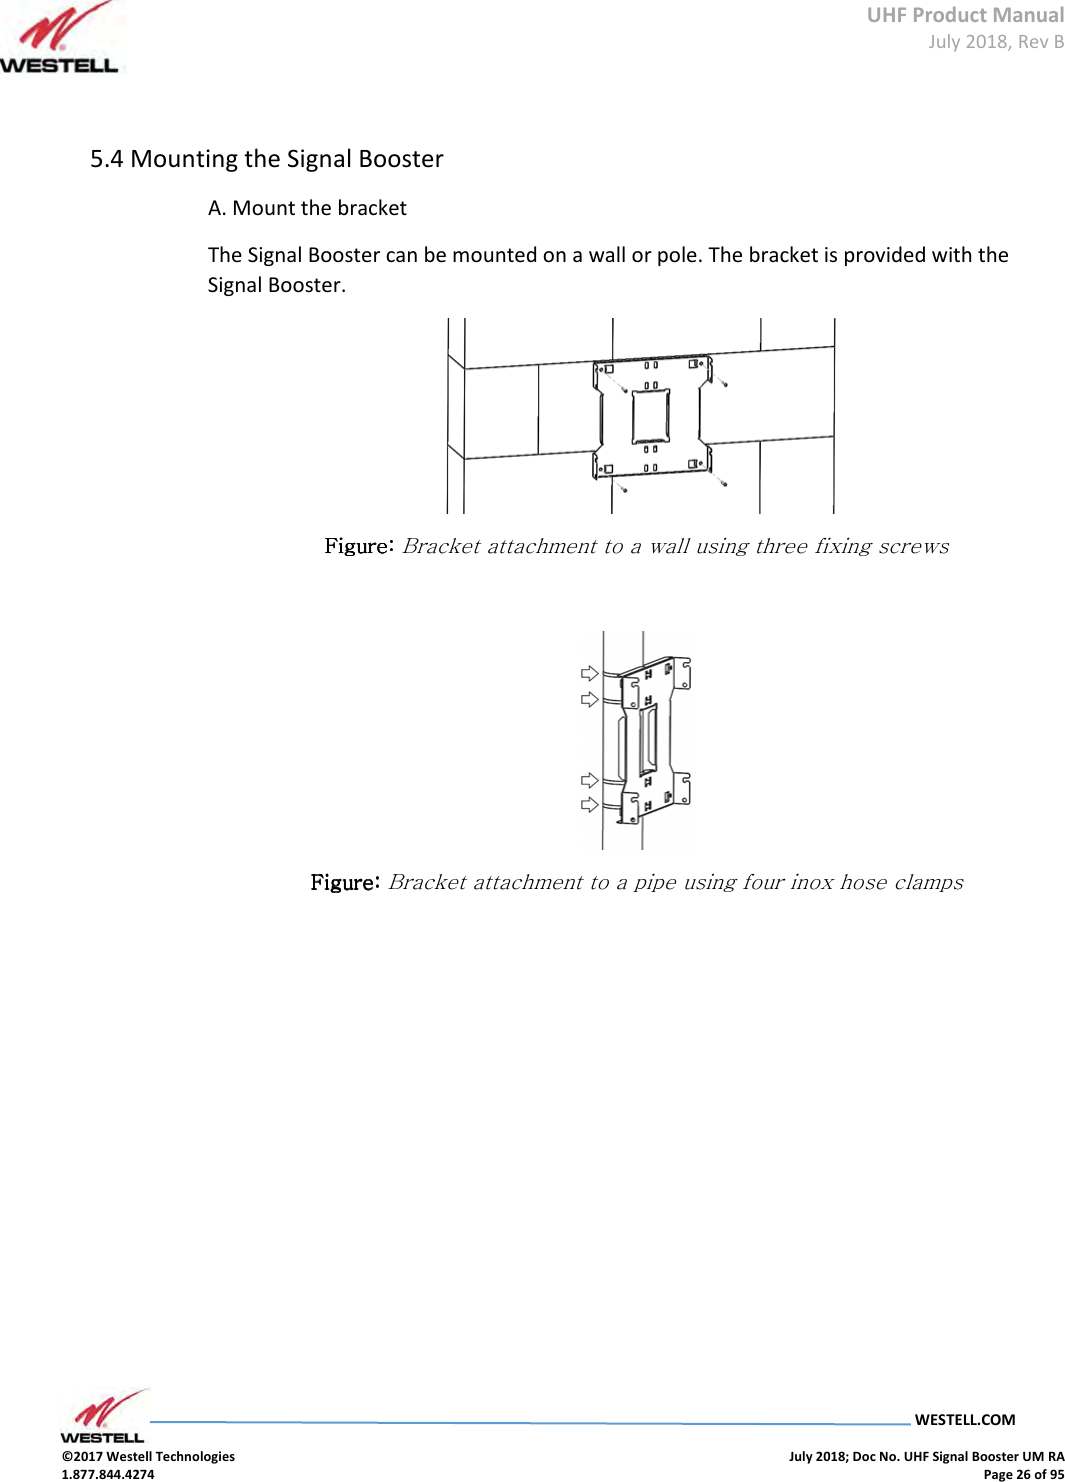 UHF Product Manual July 2018, Rev B   WESTELL.COM  ©2017 Westell Technologies    July 2018; Doc No. UHF Signal Booster UM RA 1.877.844.4274    Page 26 of 95   5.4 Mounting the Signal Booster  A. Mount the bracket The Signal Booster can be mounted on a wall or pole. The bracket is provided with the Signal Booster.  Figure: Figure: Figure: Figure: Bracket attachment to a wall using three fixing screws   Figure: Figure: Figure: Figure: Bracket attachment to a pipe using four inox hose clamps     